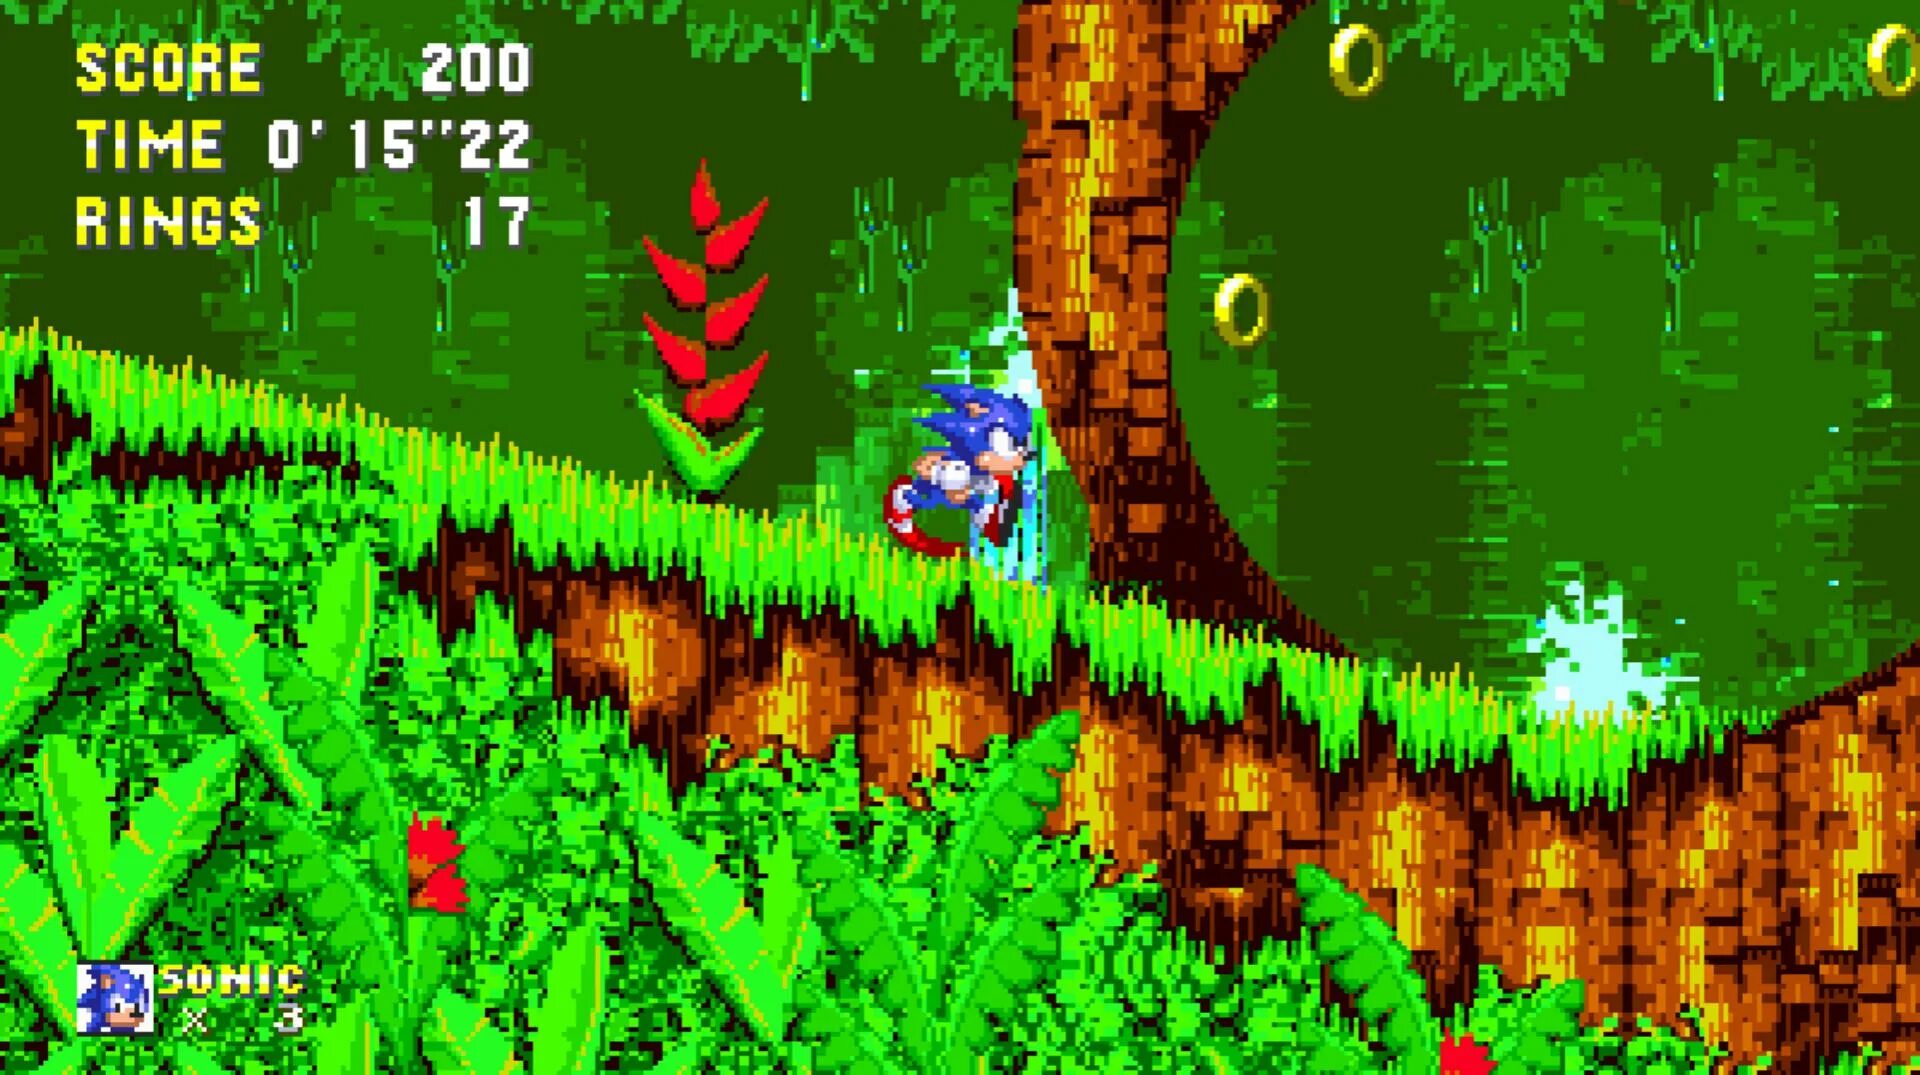 Sonic 3 island. Соник 3 АИР. Sonic 3 a.i.r. (Angel Island revisited). Sonic 3 and Knuckles. Sonic 3 Forever.